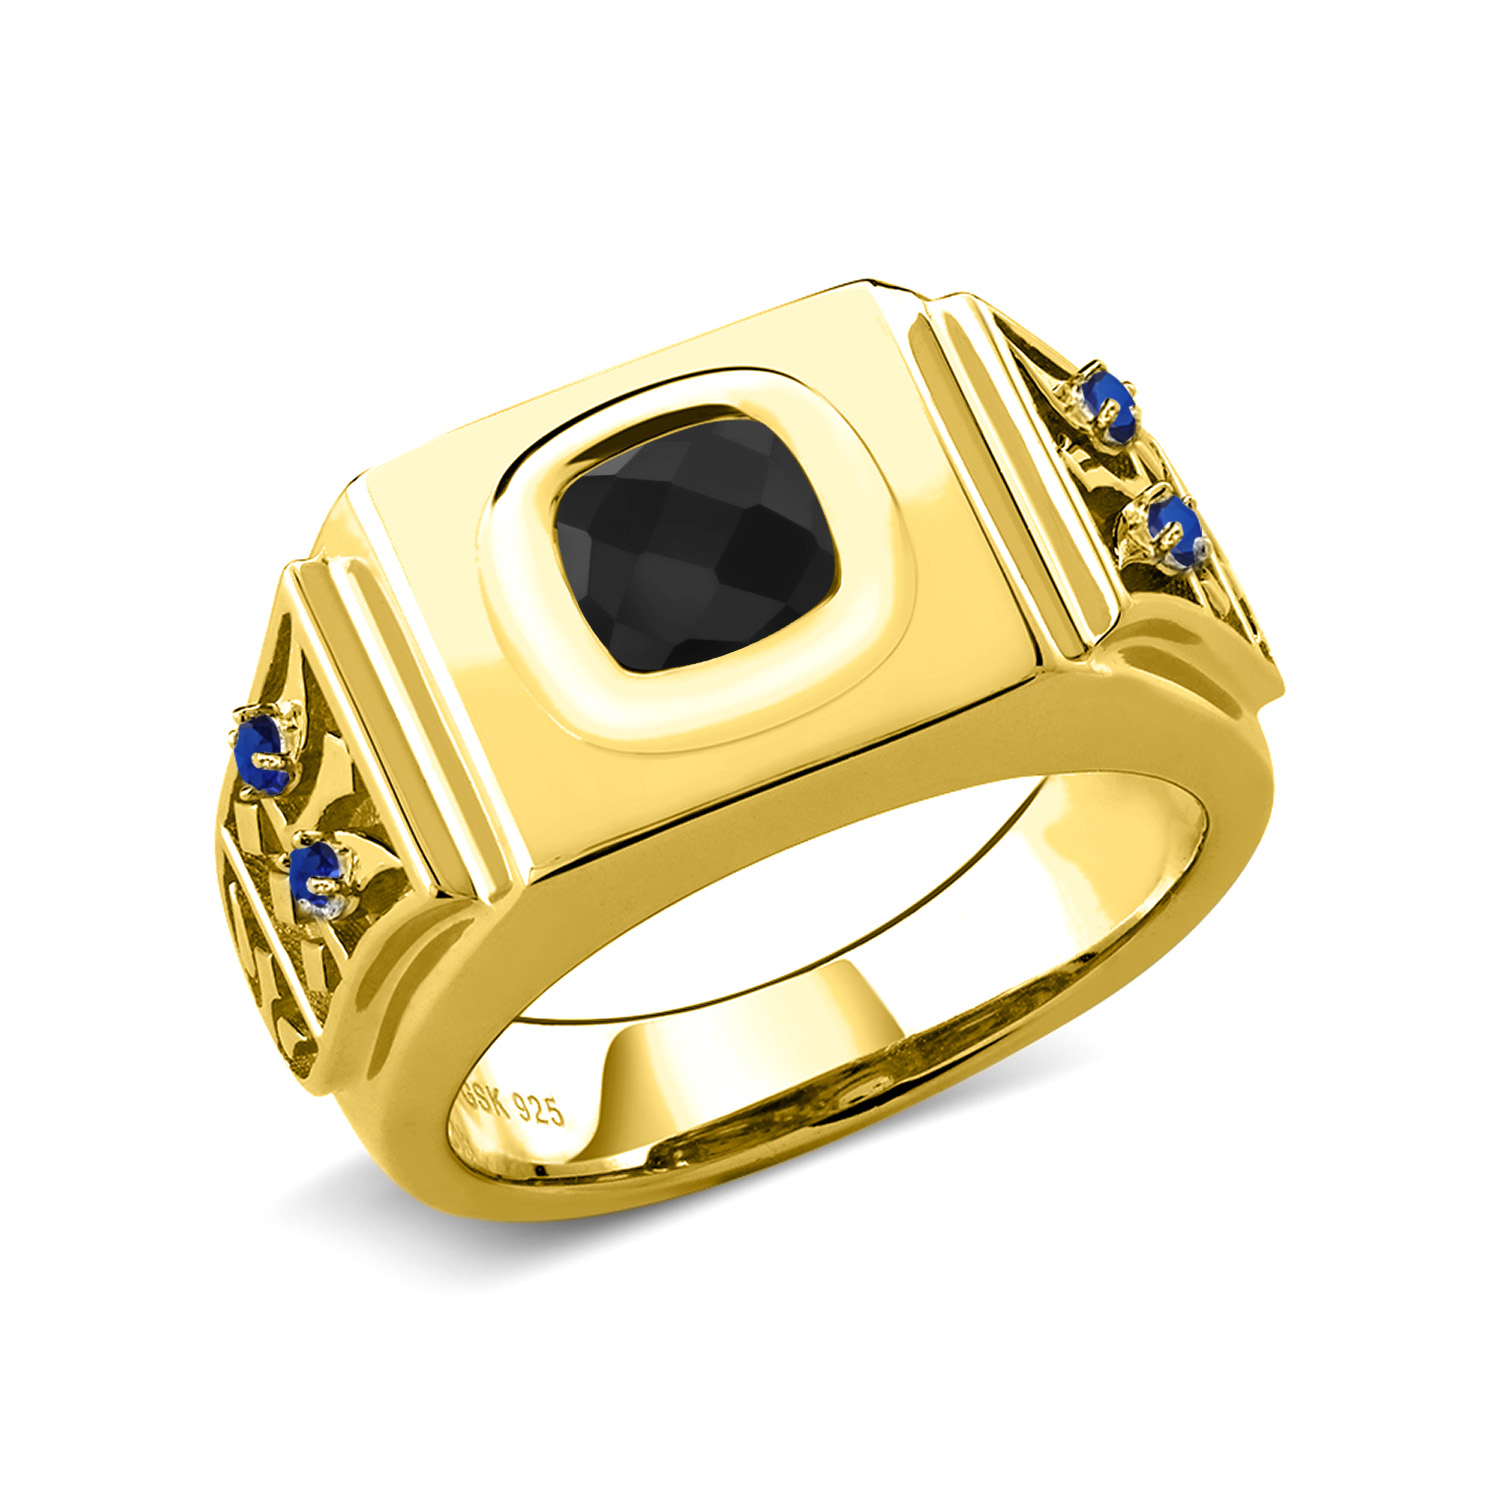 Gem Stone King 2.15 Ct Cushion Checkerboard Black Onyx Blue Created Sapphire 18K Yellow Gold Plated Silver Men's Ring